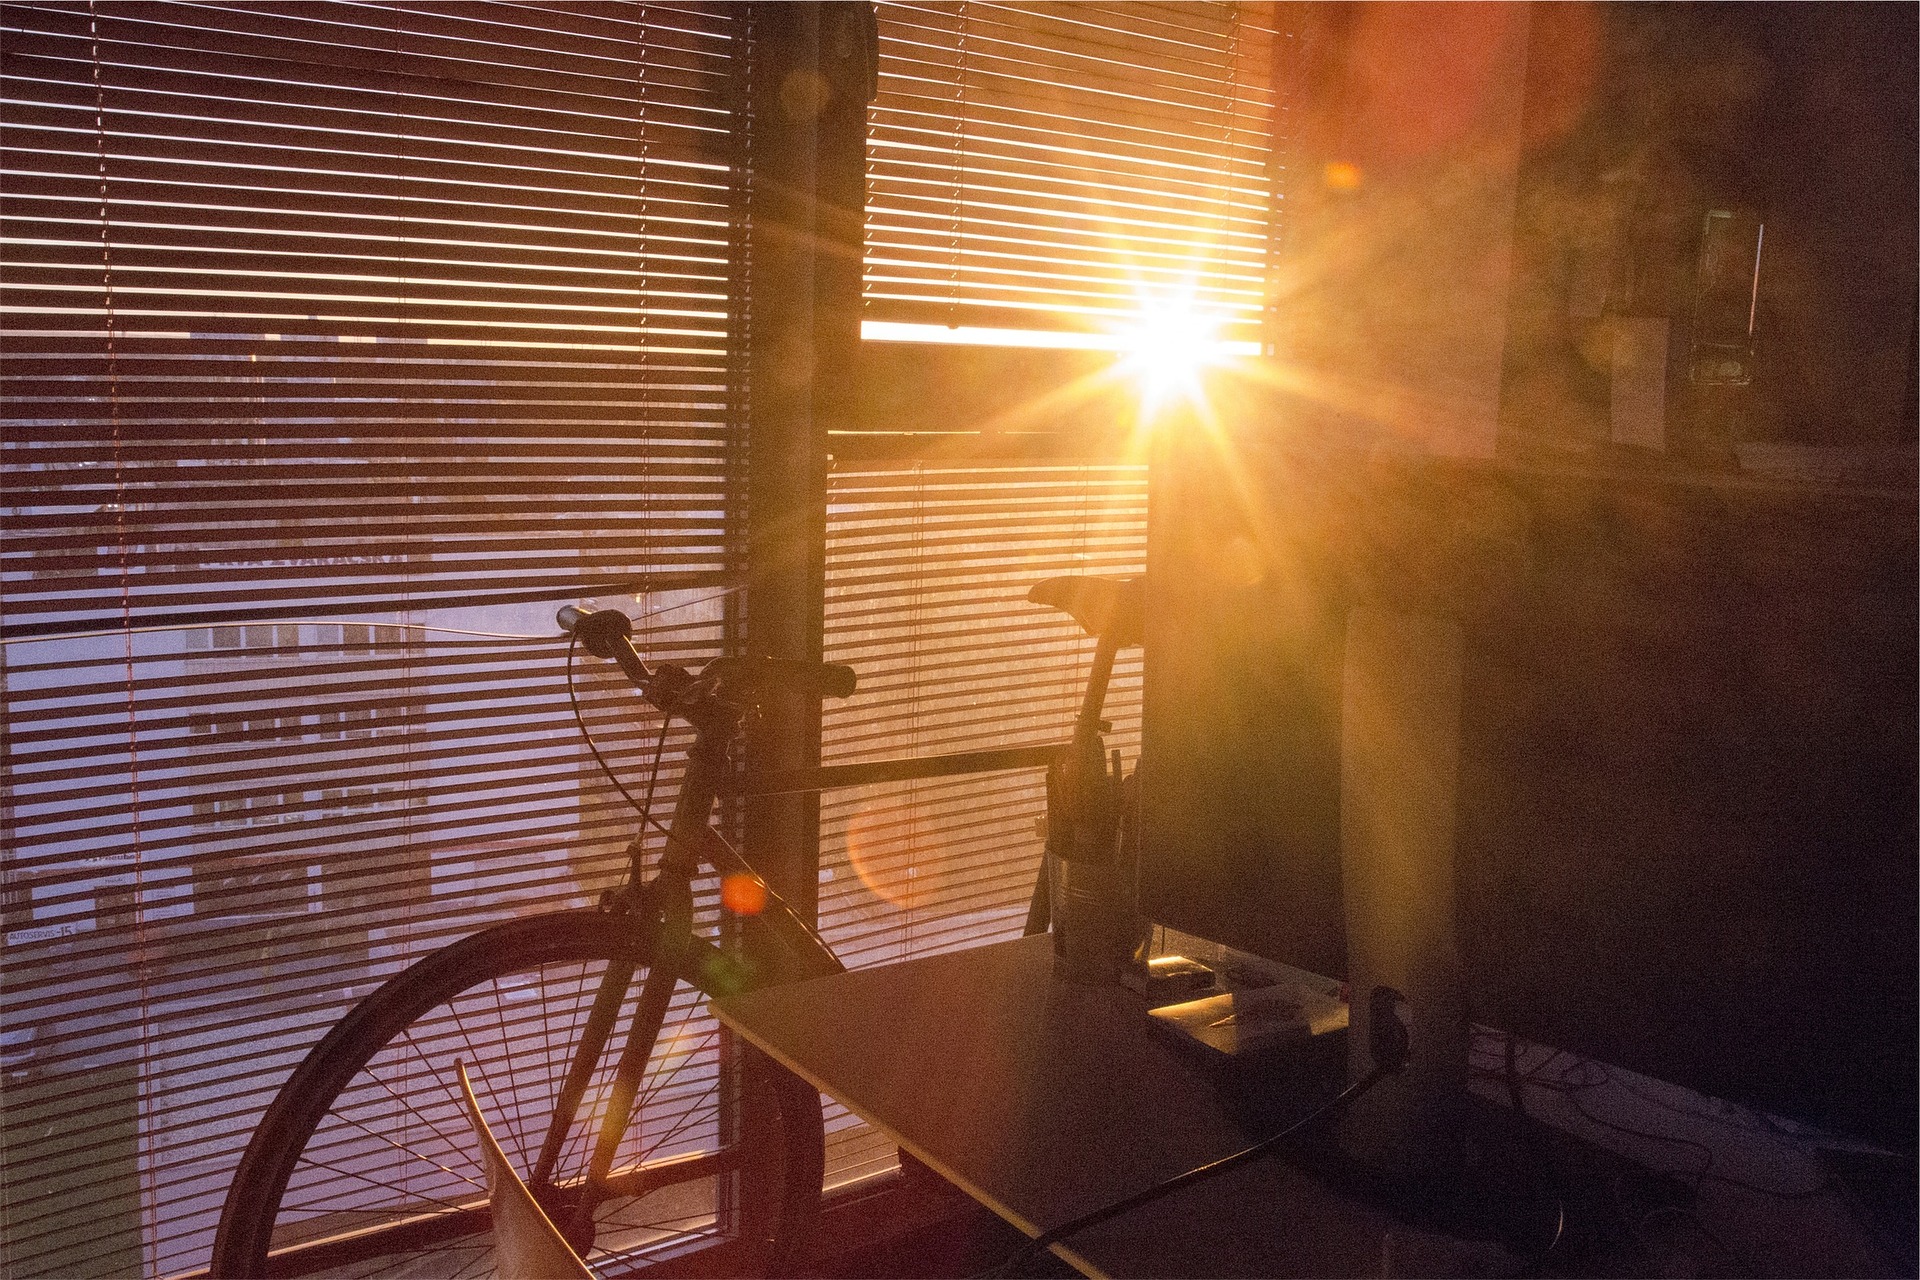 Bicycle in front of blinds